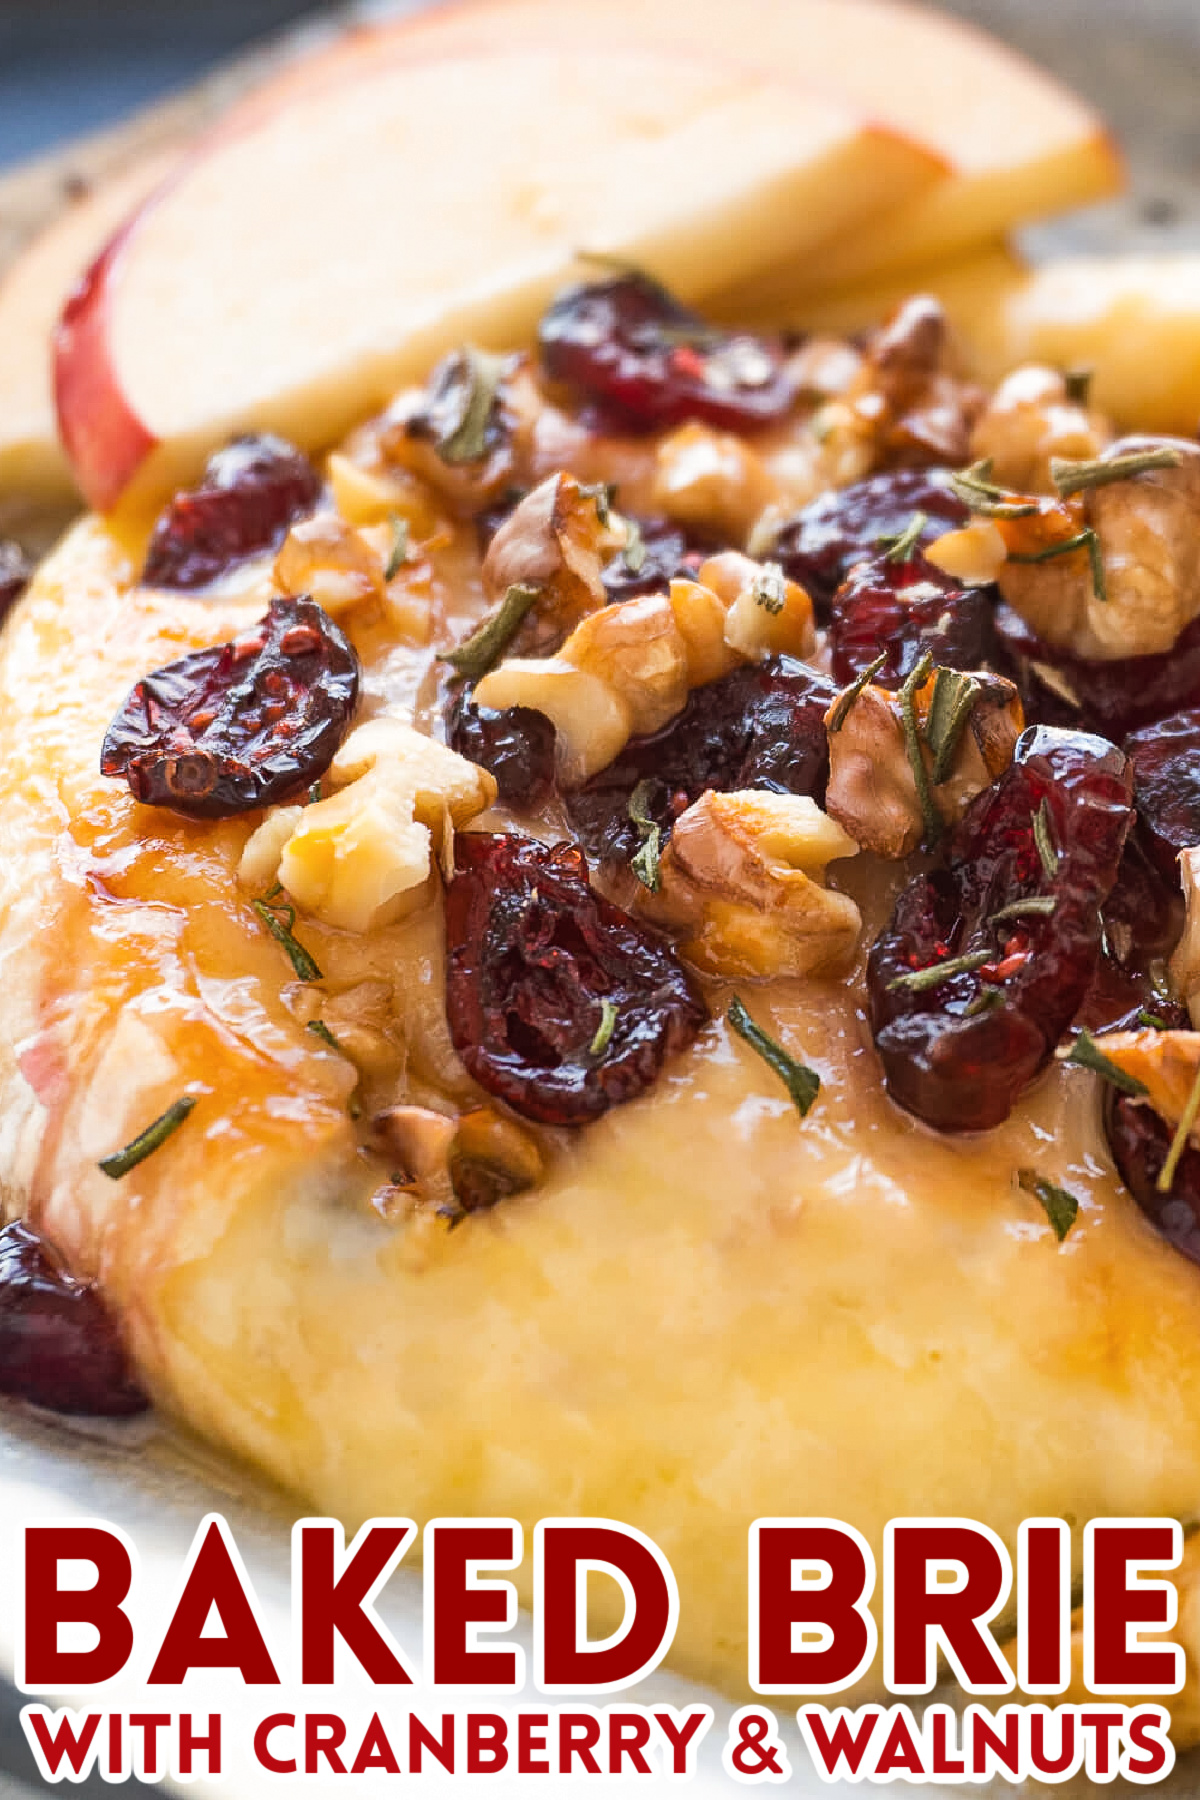 Learn how to make baked brie with cranberries and walnuts, it's the perfect holiday party appetizer. It's quick, fancy, and tastes delicious!